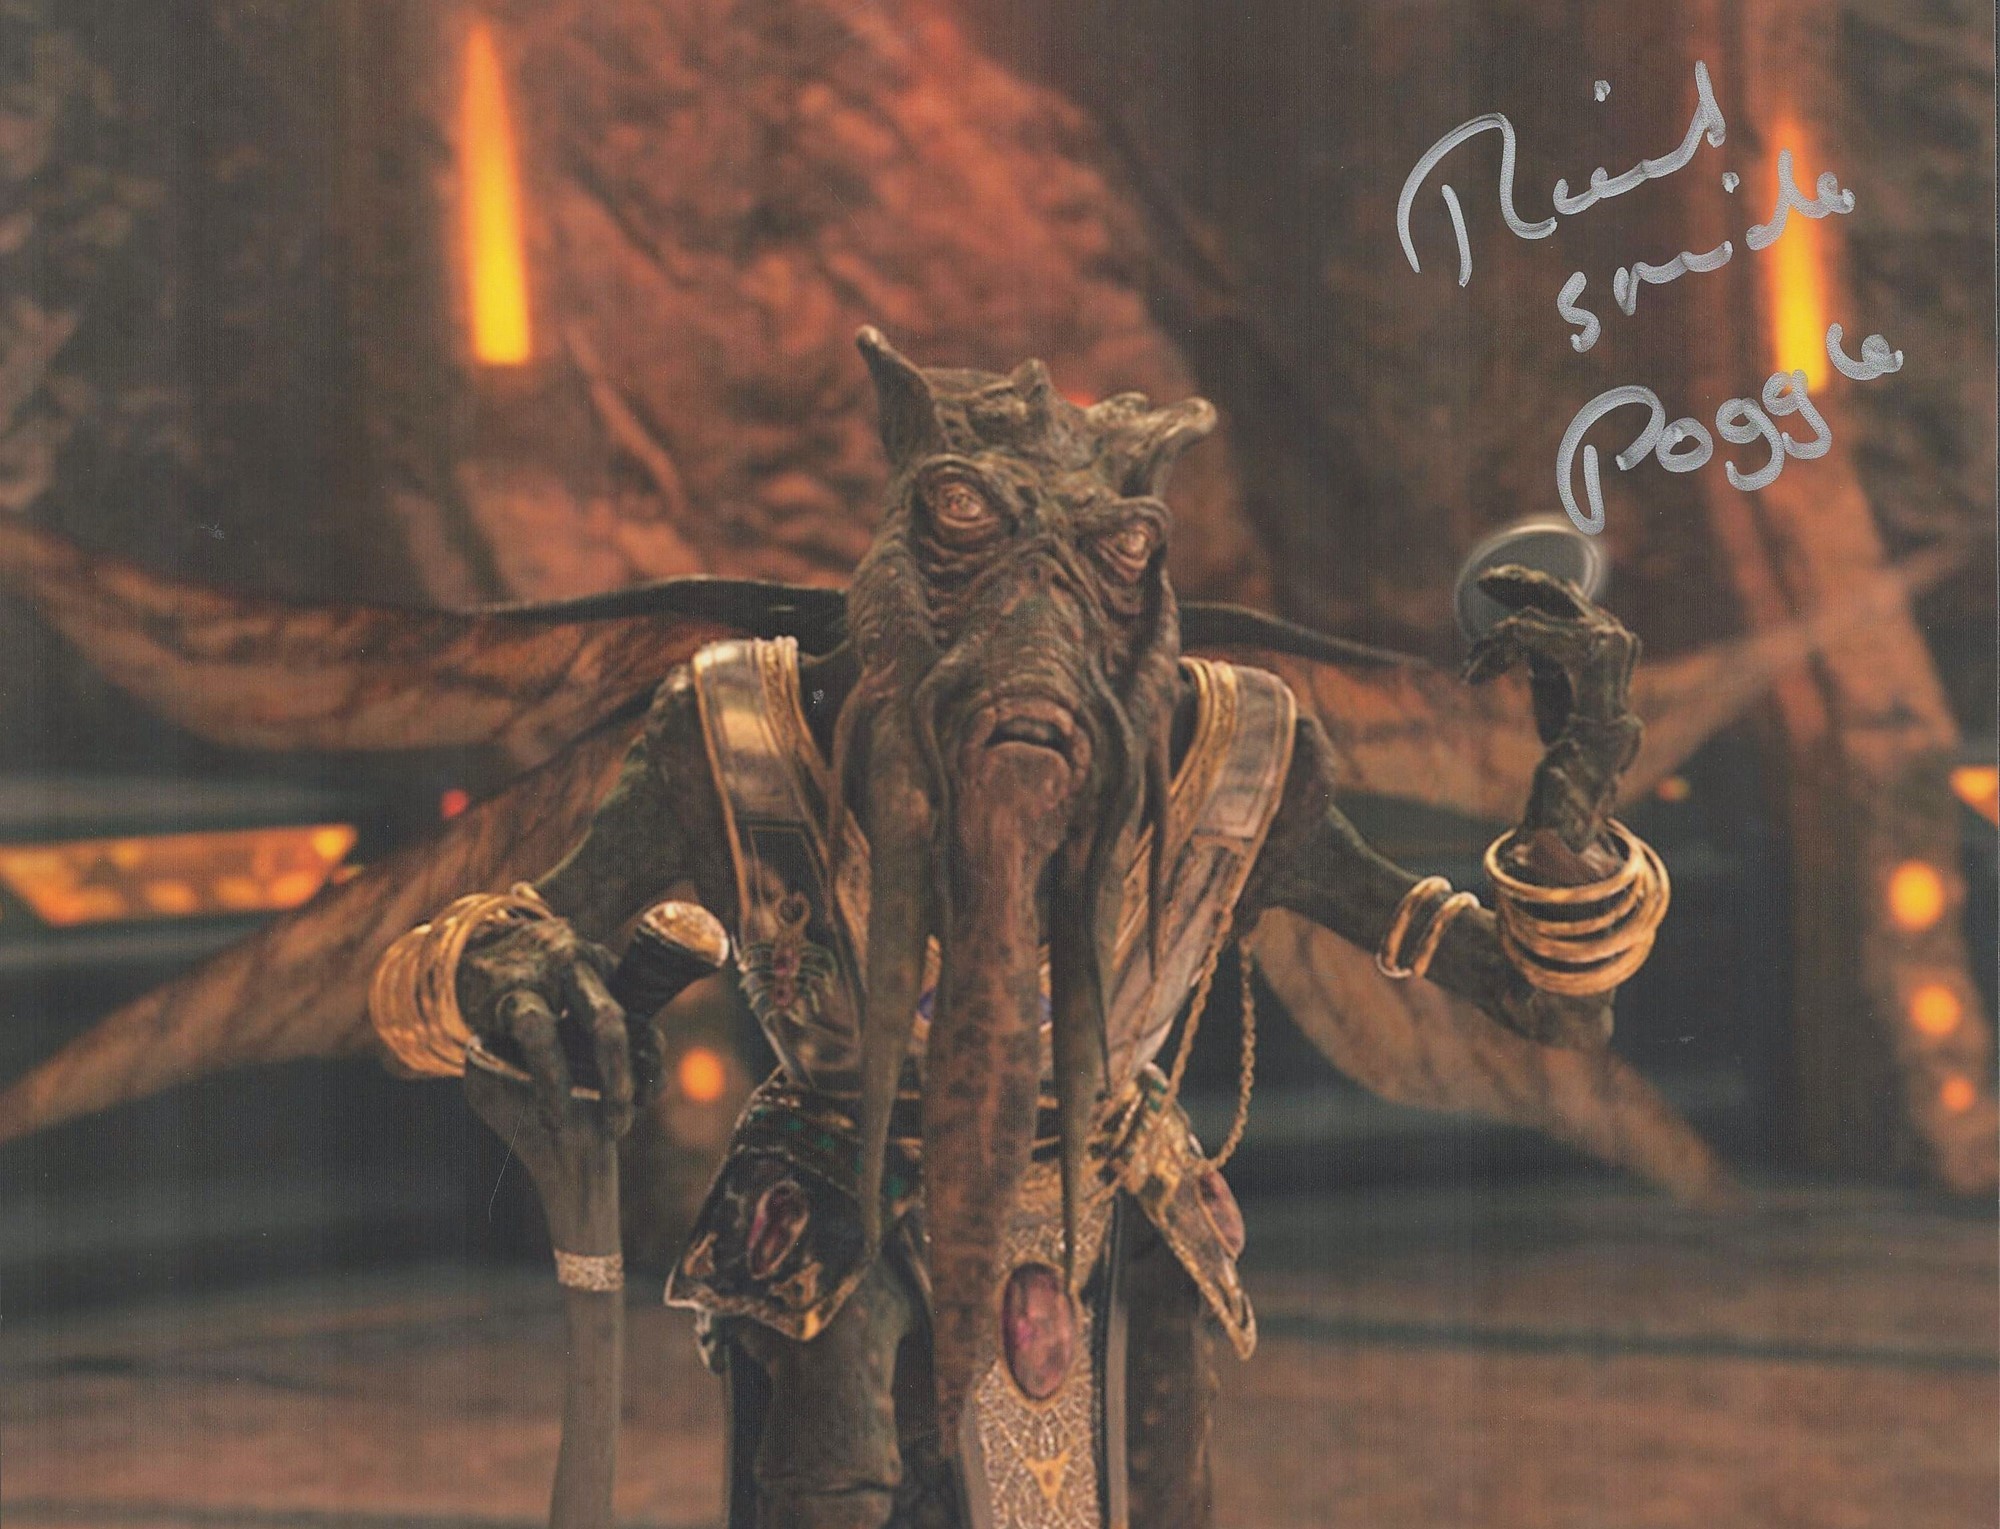 Star Wars Actor, Richard Stride signed 10x8 colour photograph. Stride is known for his work on